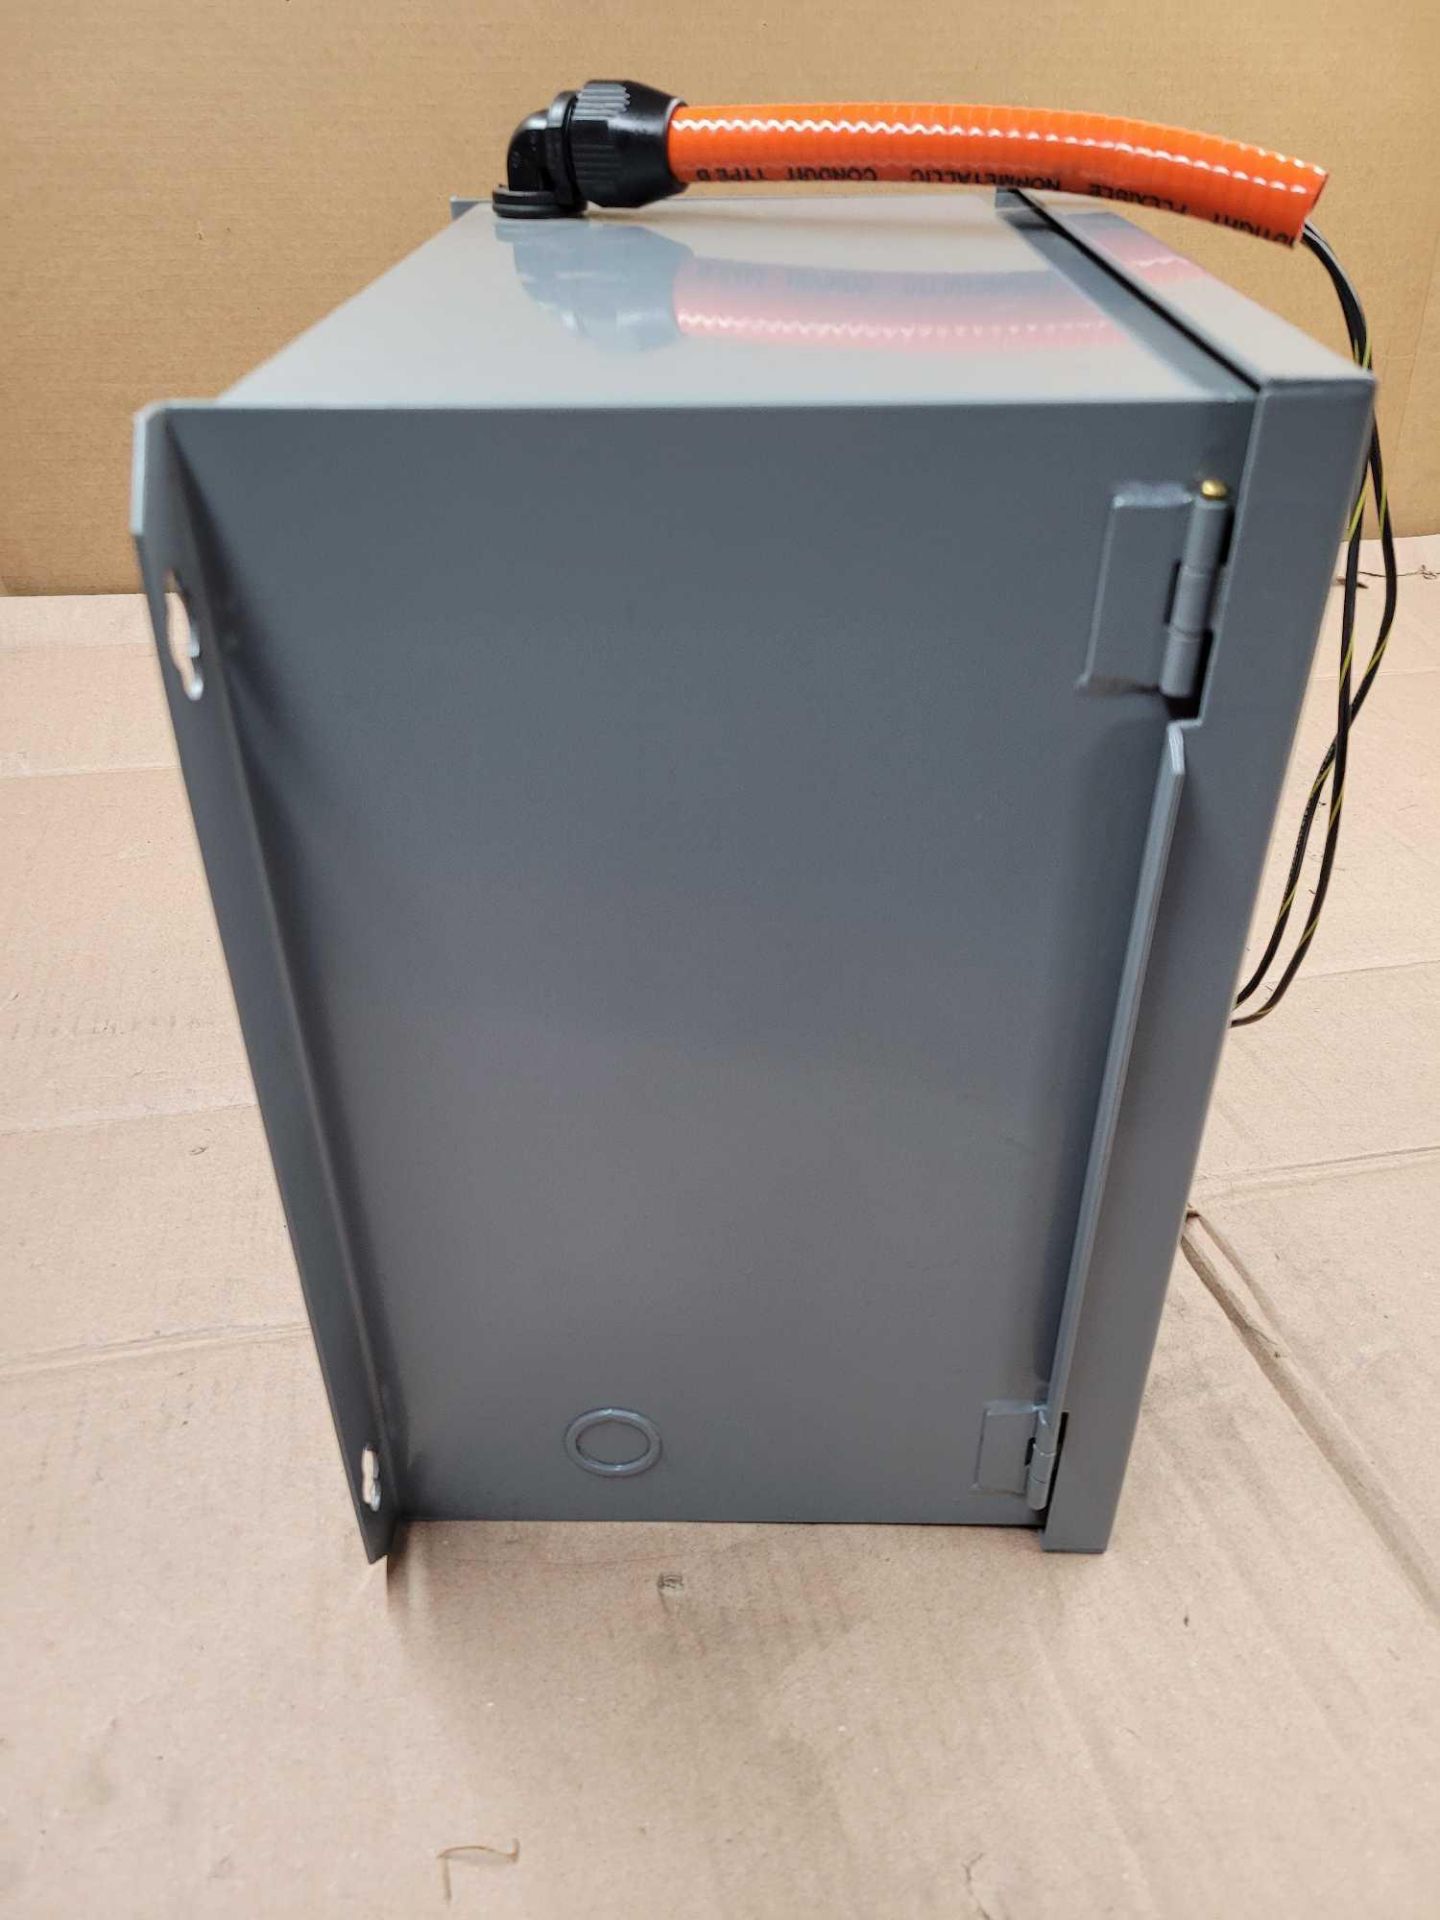 SQUARE D SK3000G3 / Series A Class 9070 Transformer Disconnect  /  Lot Weight: 65.2 lbs - Image 9 of 10